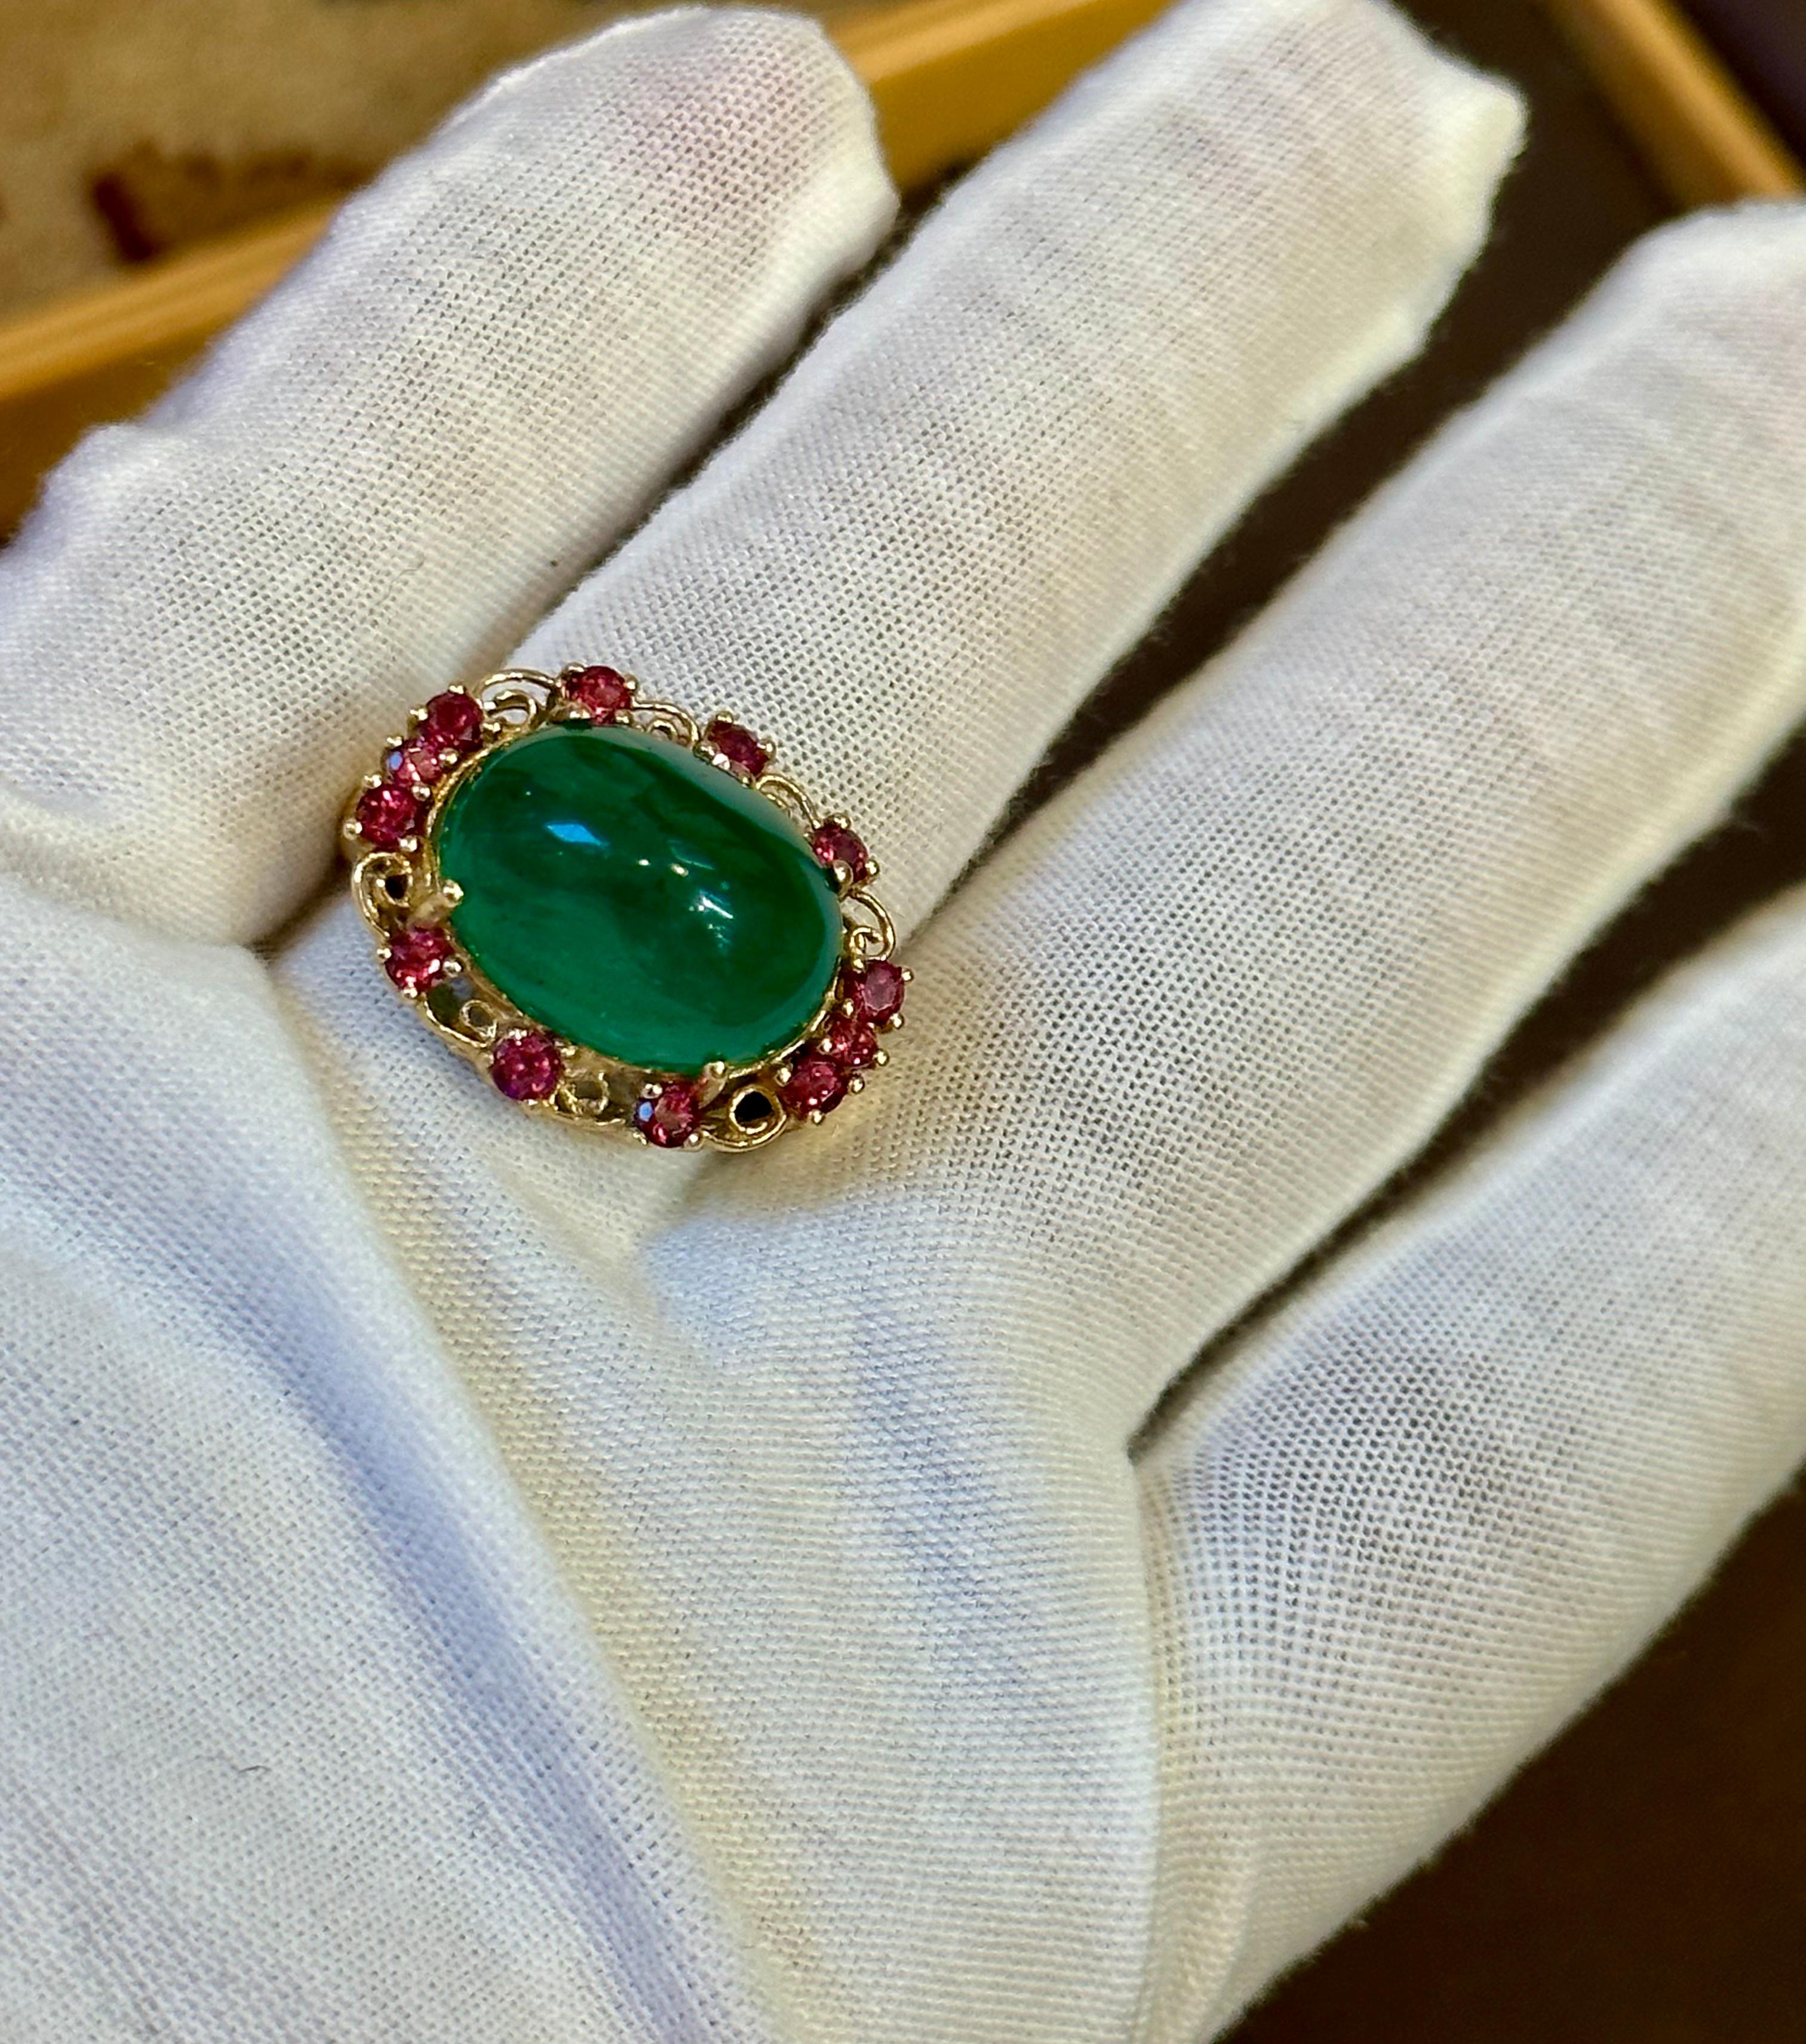 This classic cocktail ring features a stunning oval natural emerald cabochon surrounded by rhodolite garnet. The emerald is 10.5 carats and is estate with no color enhancement. The ring is crafted from 14 karat yellow gold and is stamped for